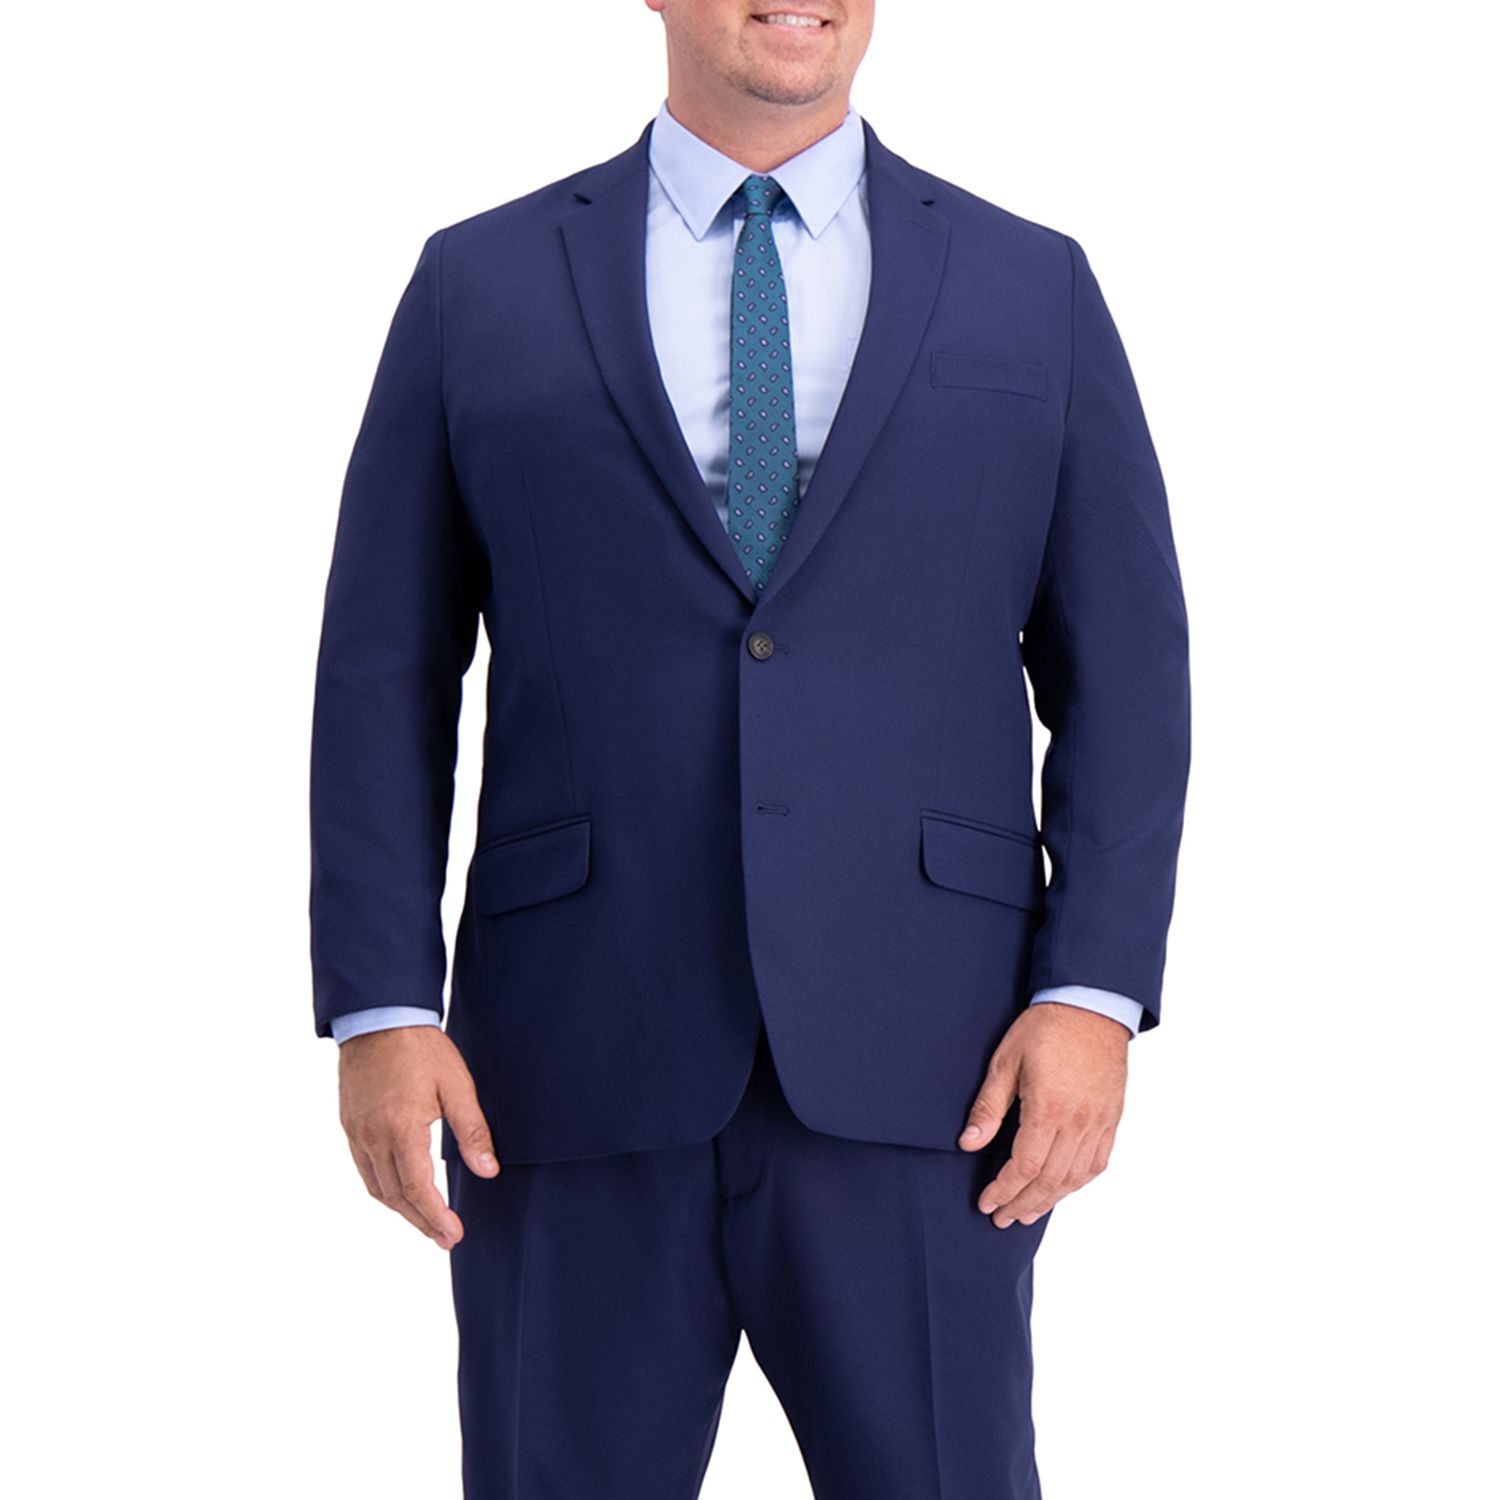 big and tall suit jacket